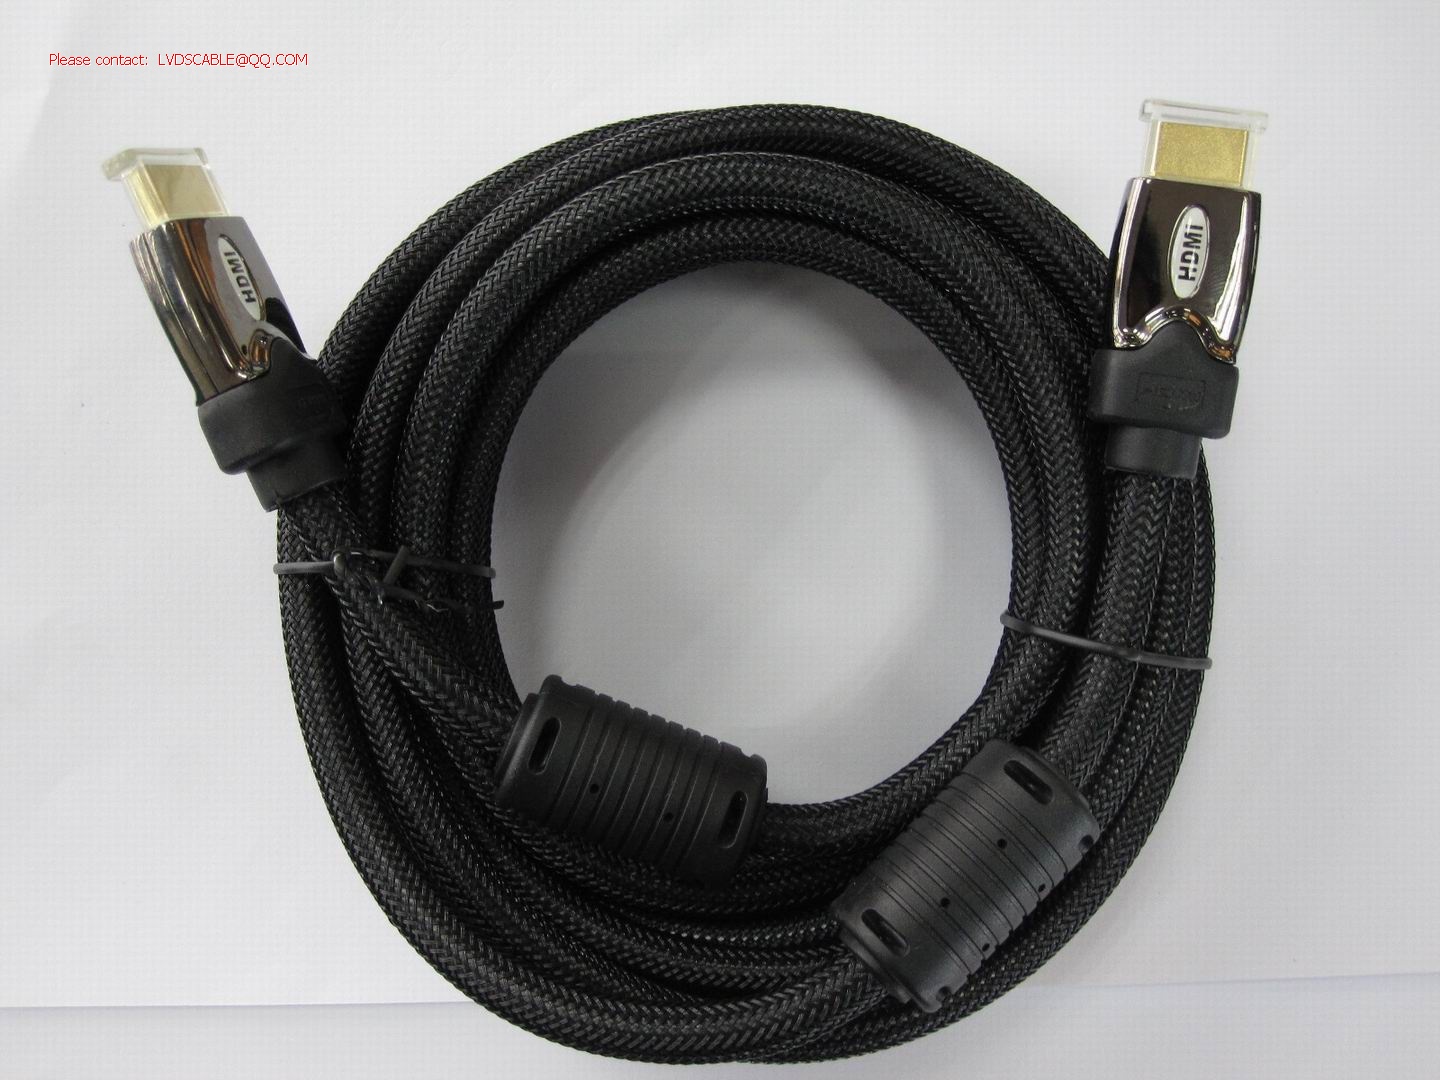 HDMI 1080p cables,HDMI Cable Manufacturer,Shielding HDMI Cable,HDMI Cable,Home Theater Accessories,HDMI Products,Cables,Best Quality HDMI Cables